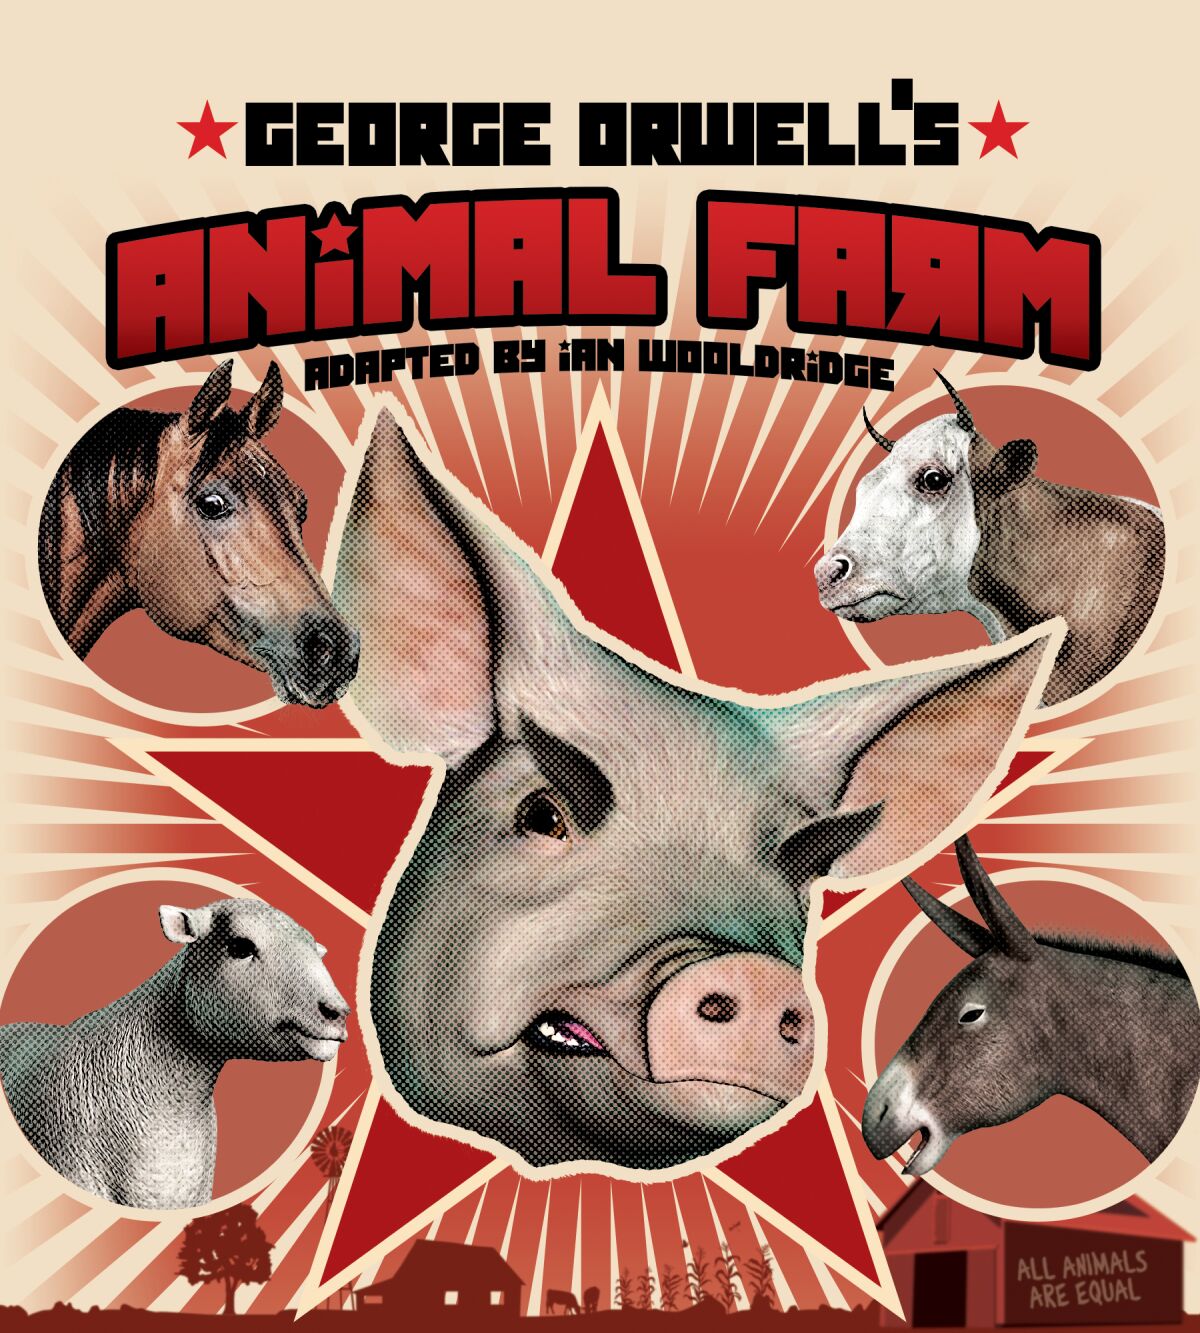 The Theatre School at North Coast Rep will present a student production of George Orwell’s "Animal Farm" with online performances May 14-17.